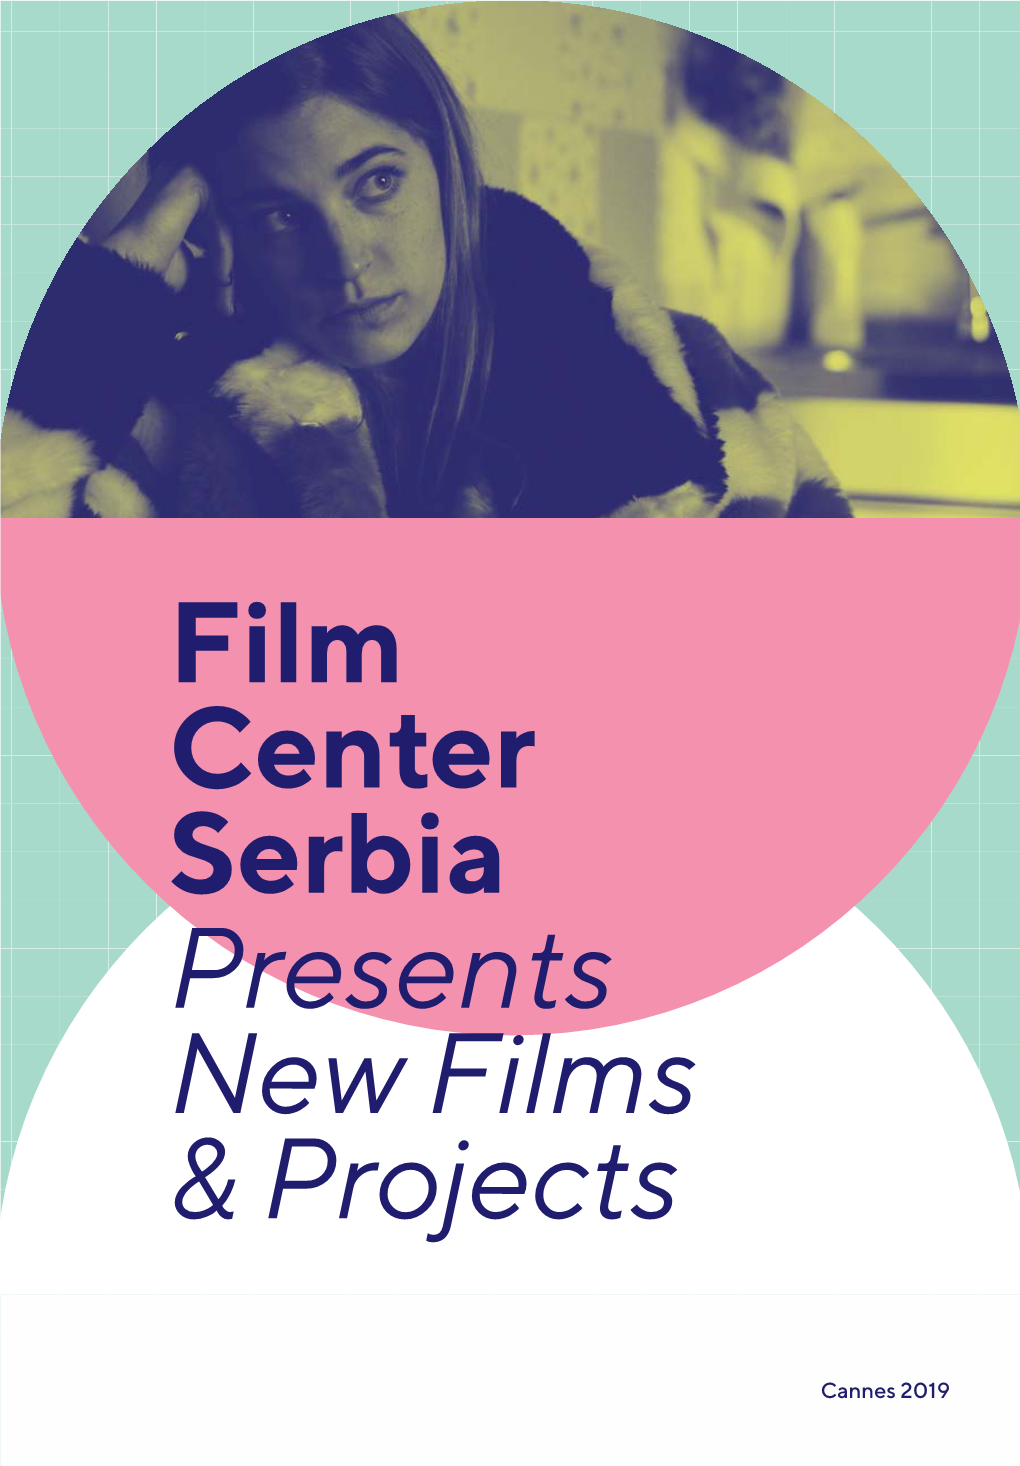 Film Center Serbia Presents New Films & Projects